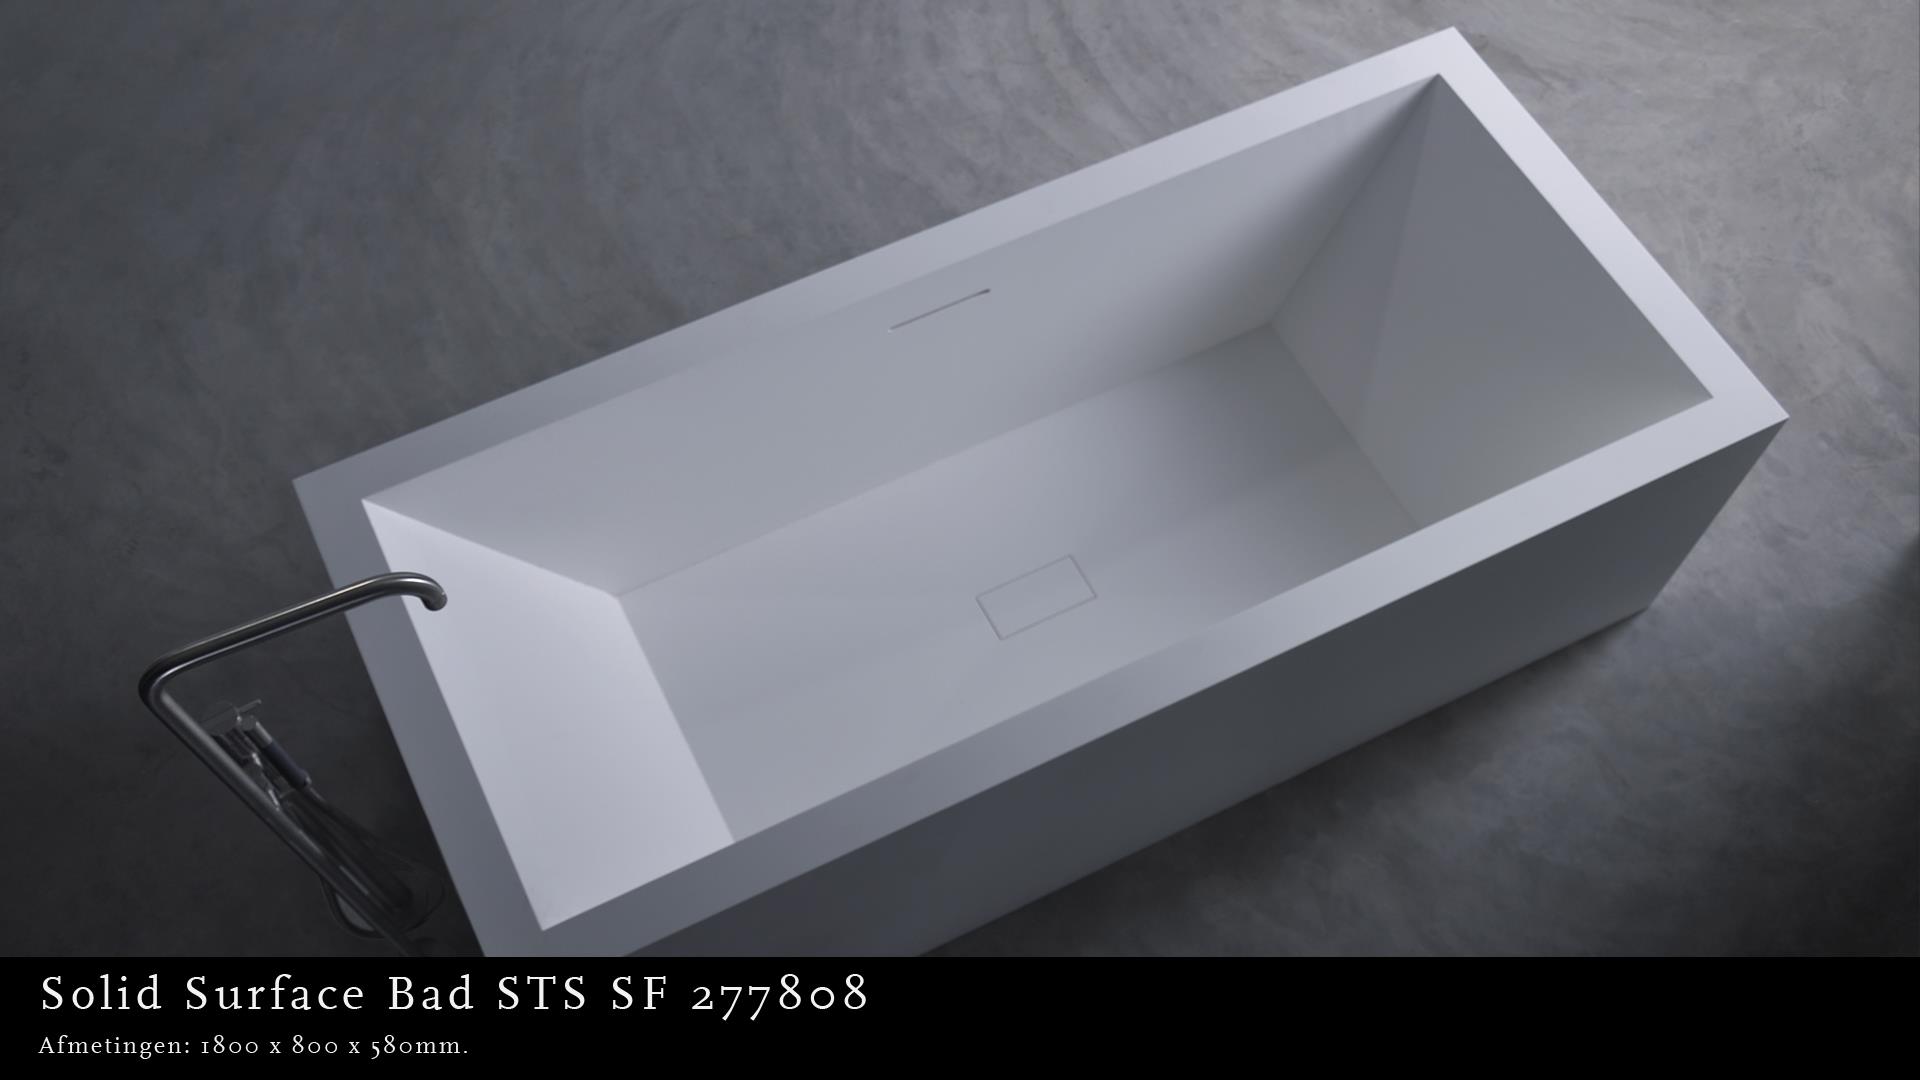 Ideavit Solid Surface